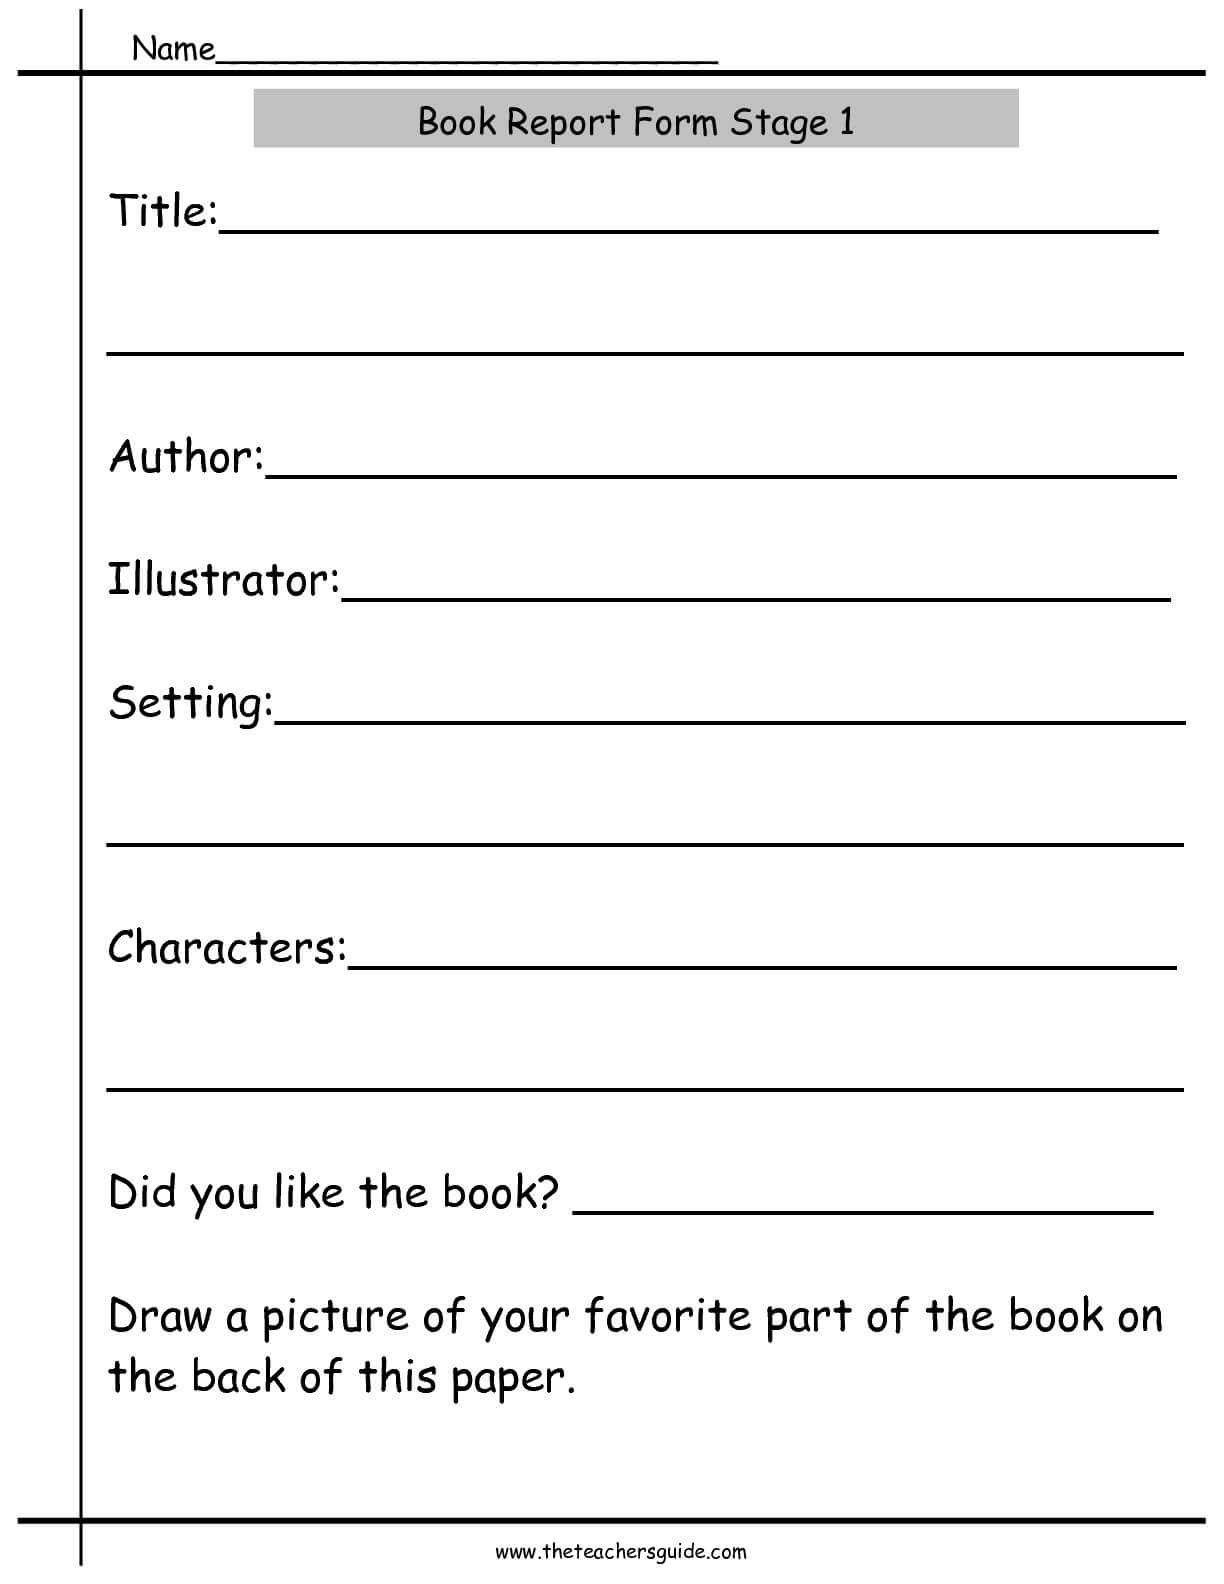 Worksheet For Book Report | Printable Worksheets And For First Grade Book Report Template